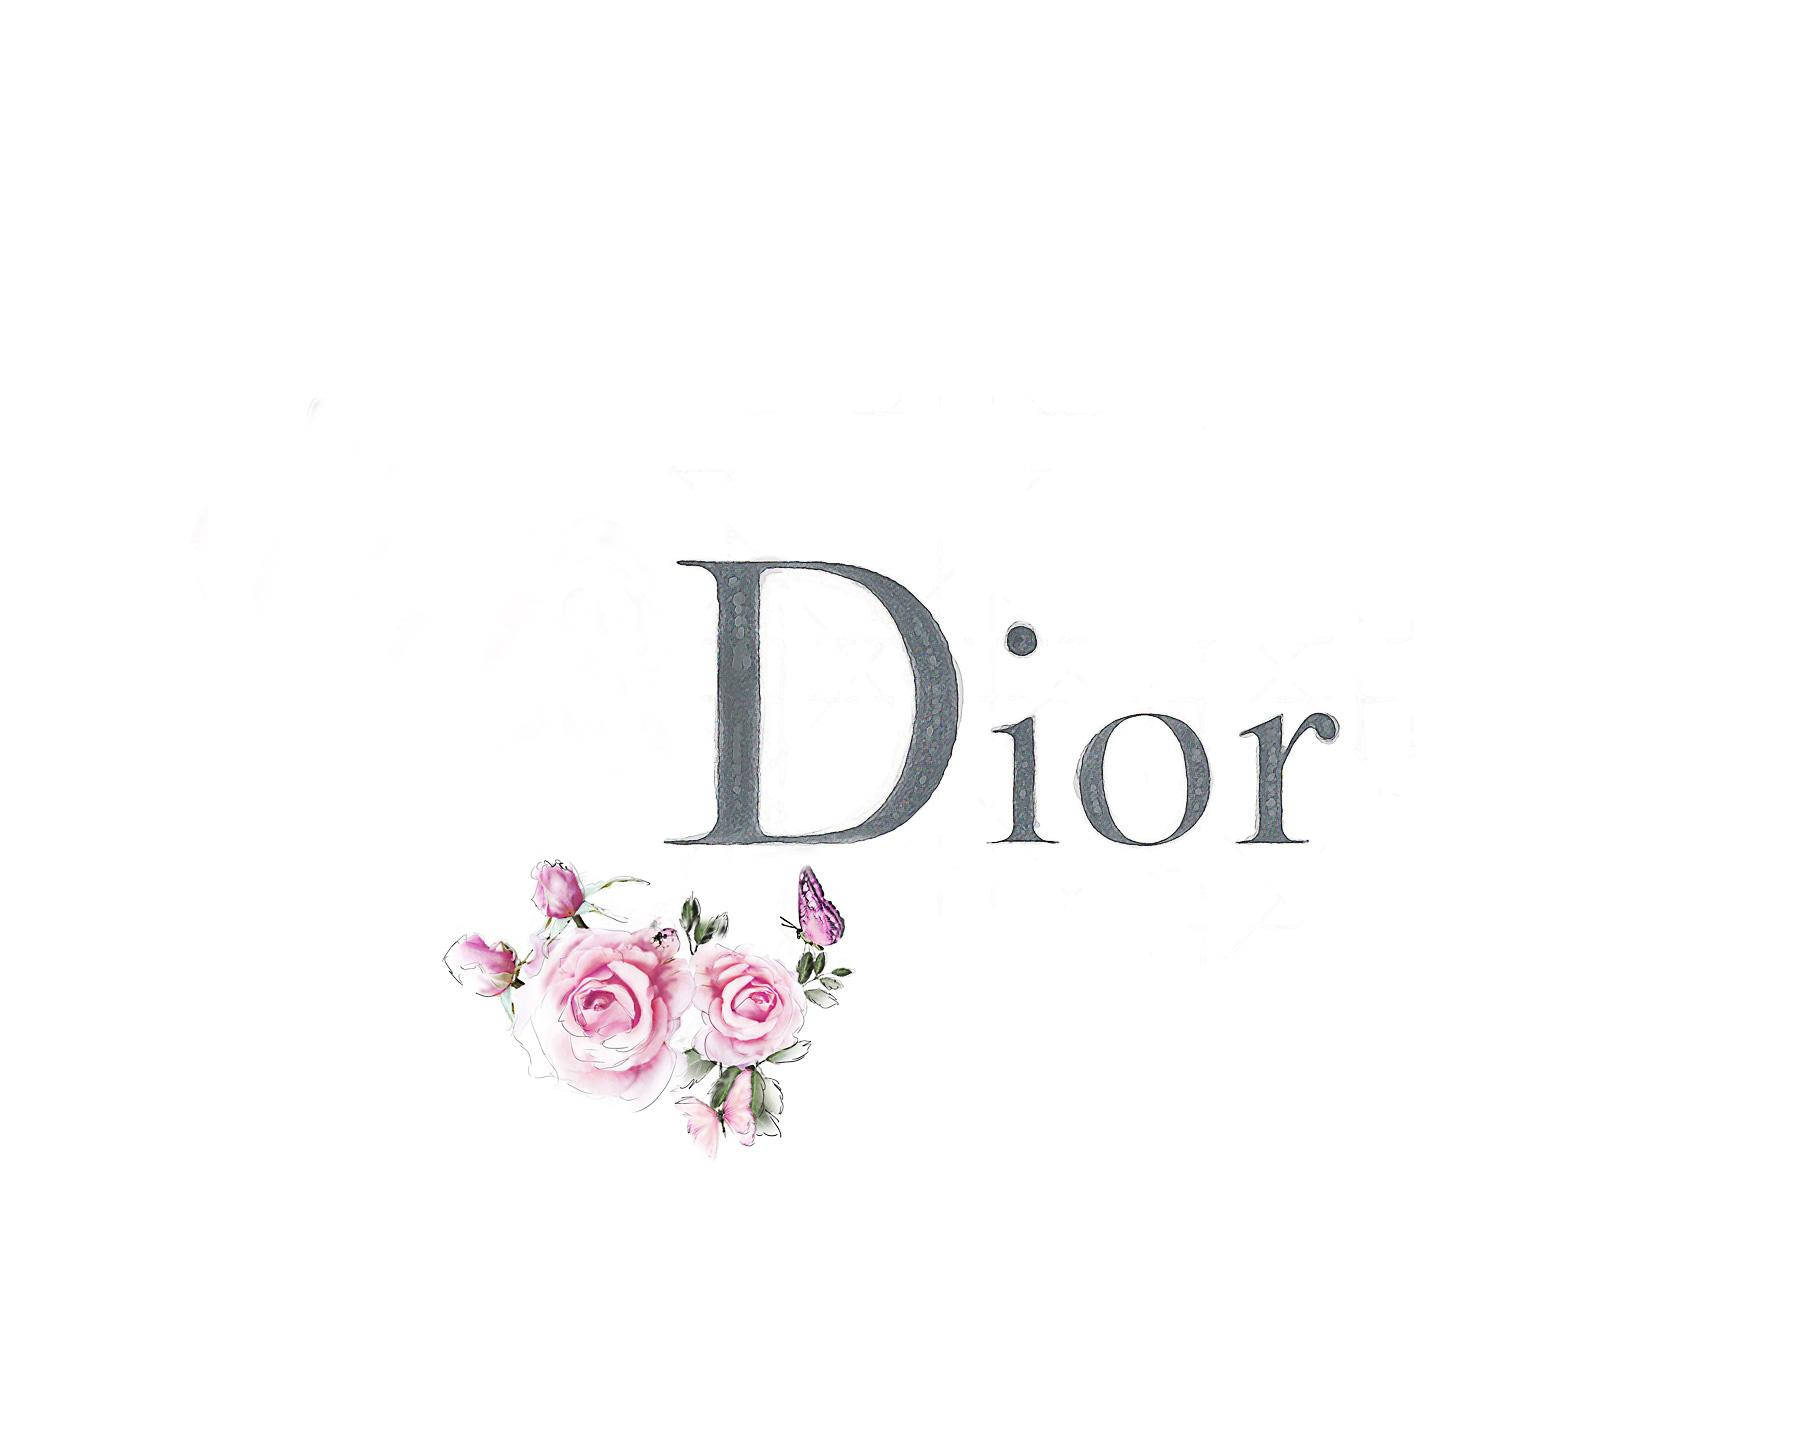 Dior Logo With Flowers Background